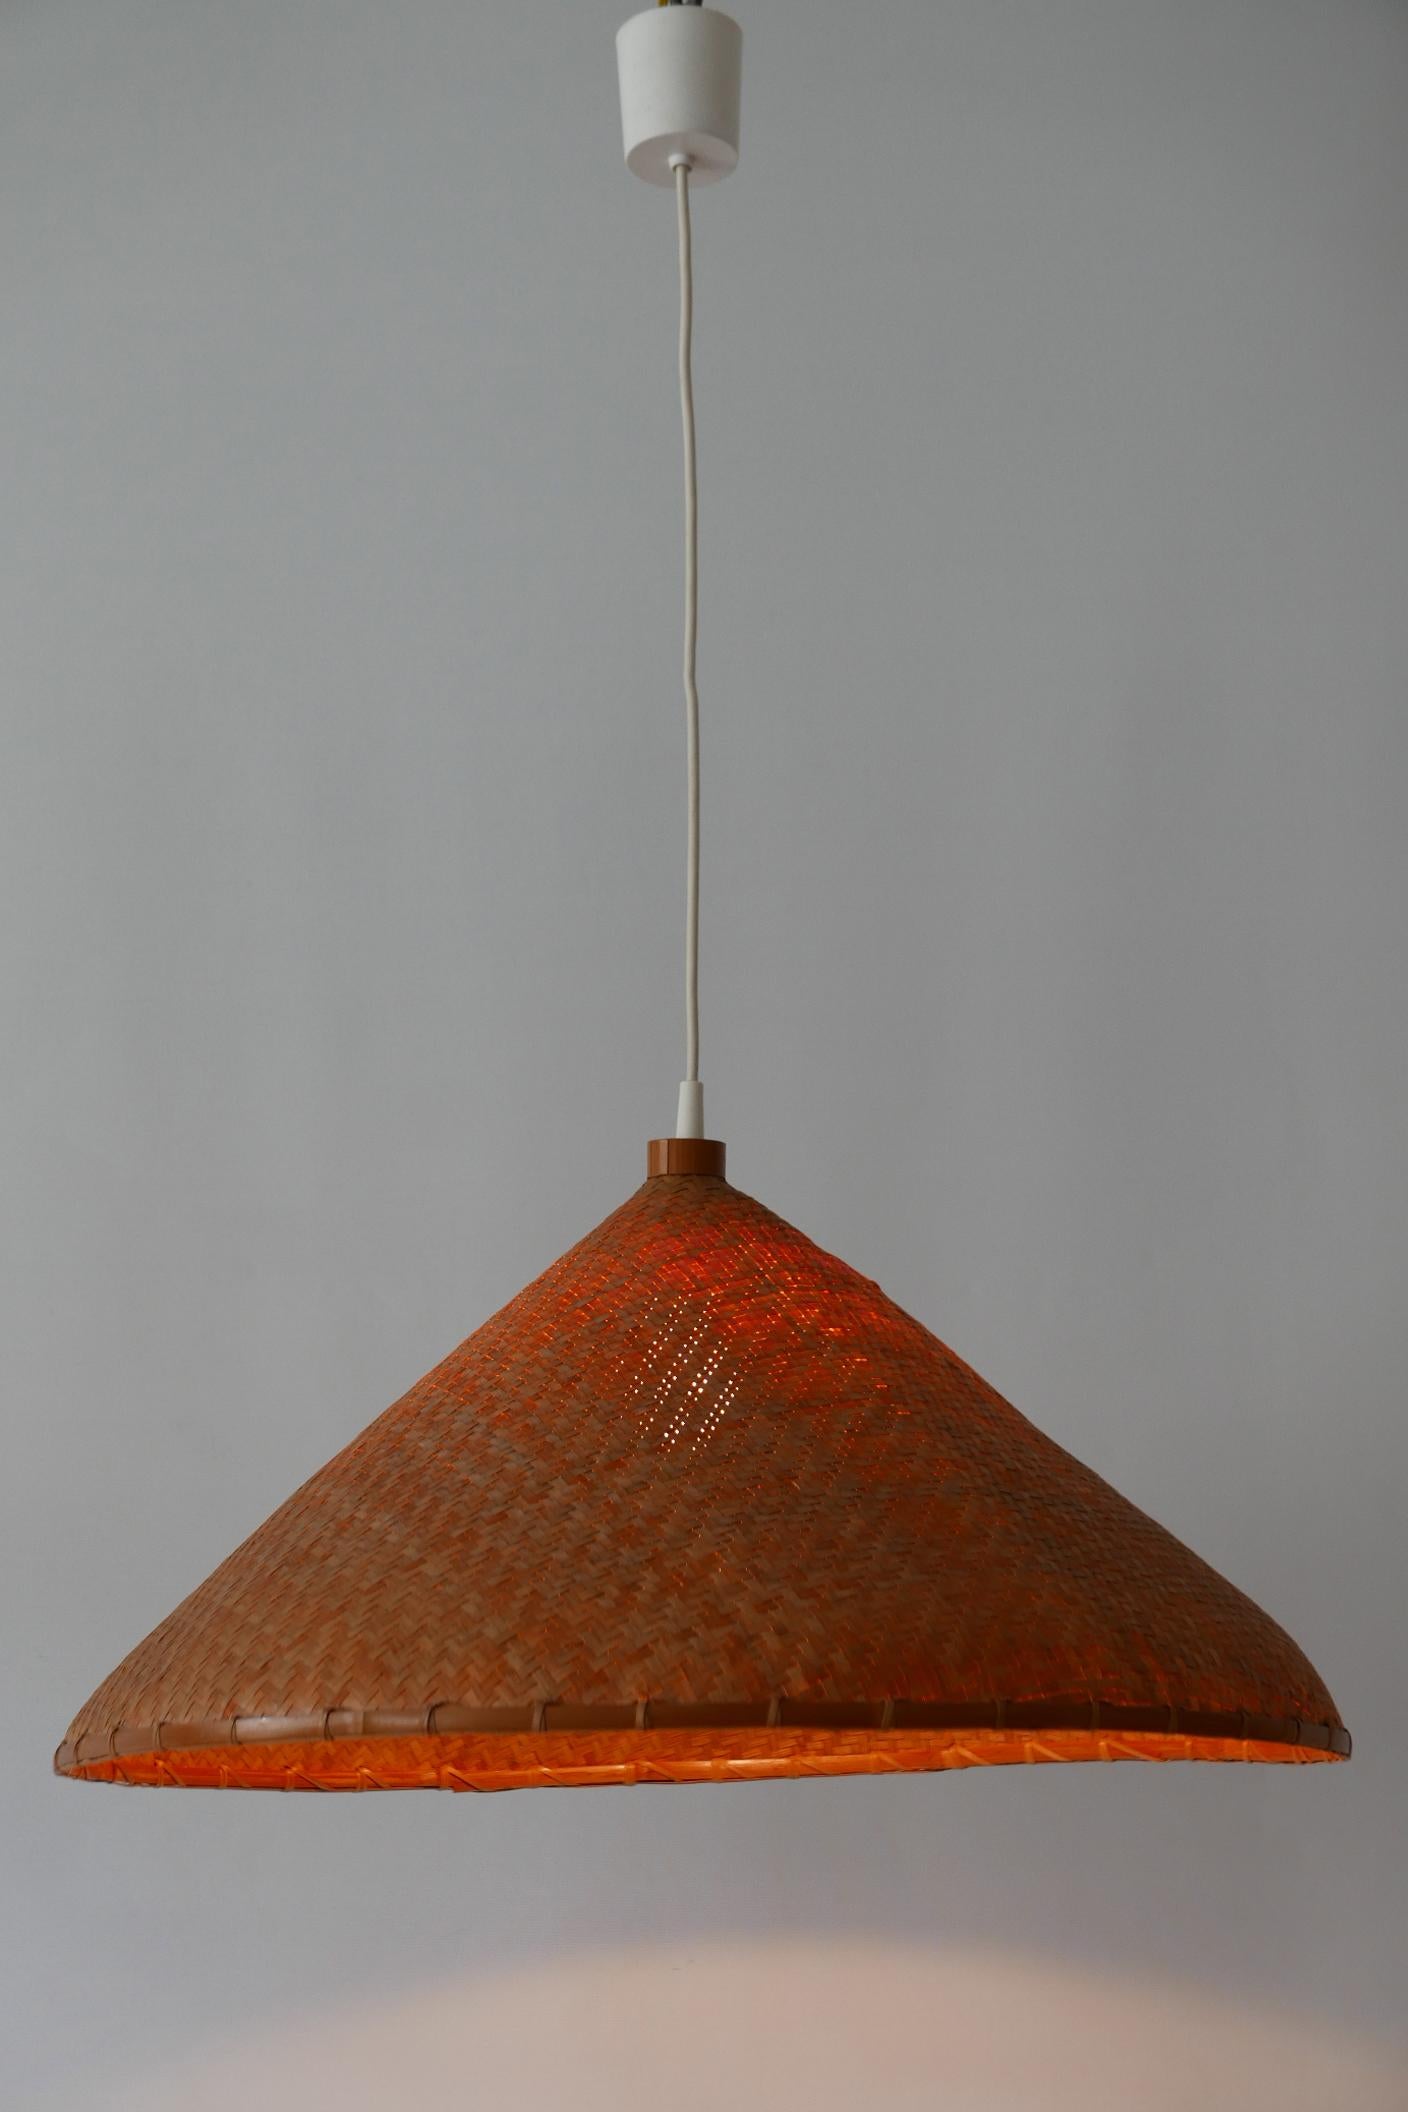 Large Mid-Century Modern Wicker Pendant Lamp or Hanging Light, Germany, 1960s For Sale 2